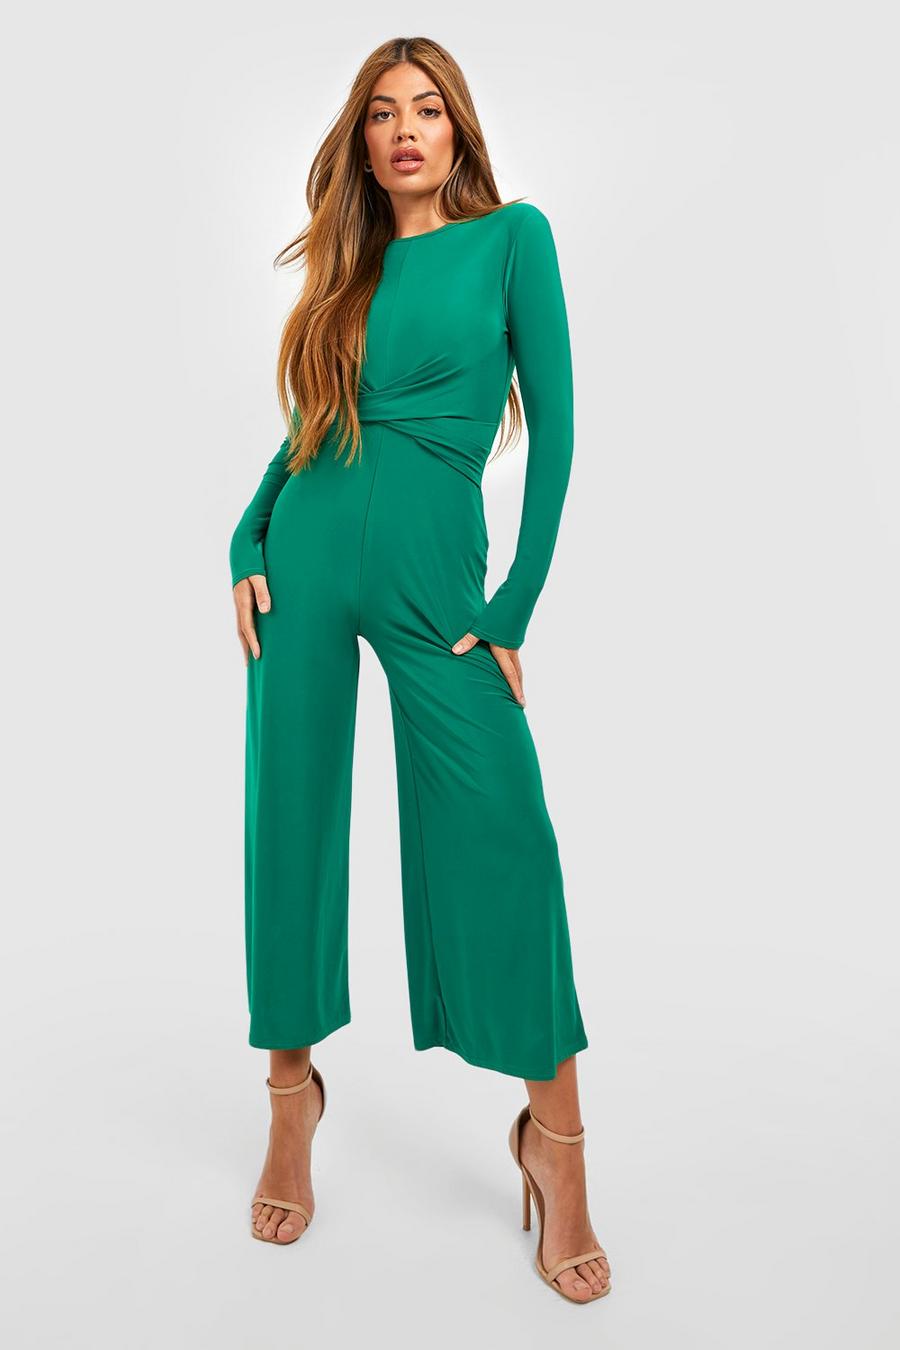 Sale Jumpsuits & Rompers | Cheap Rompers & Jumpsuits | boohoo USA